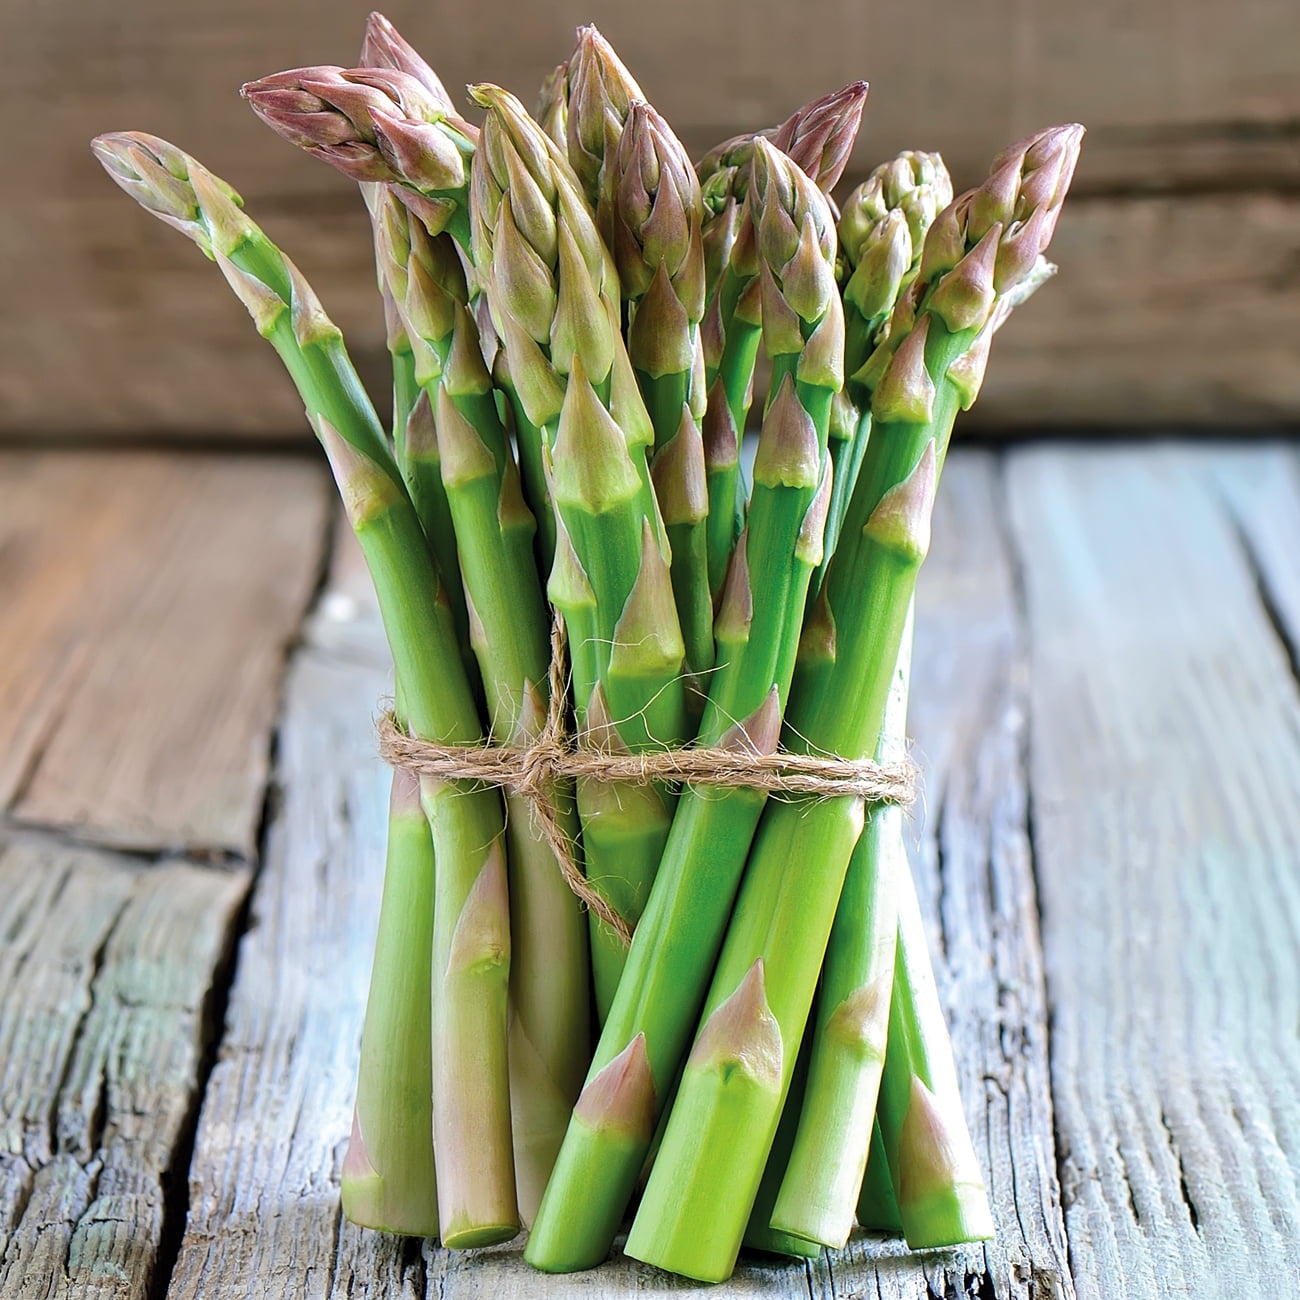 204015 Asparagus Jersey Giant Heirloom Seeds NON GMO for Planting